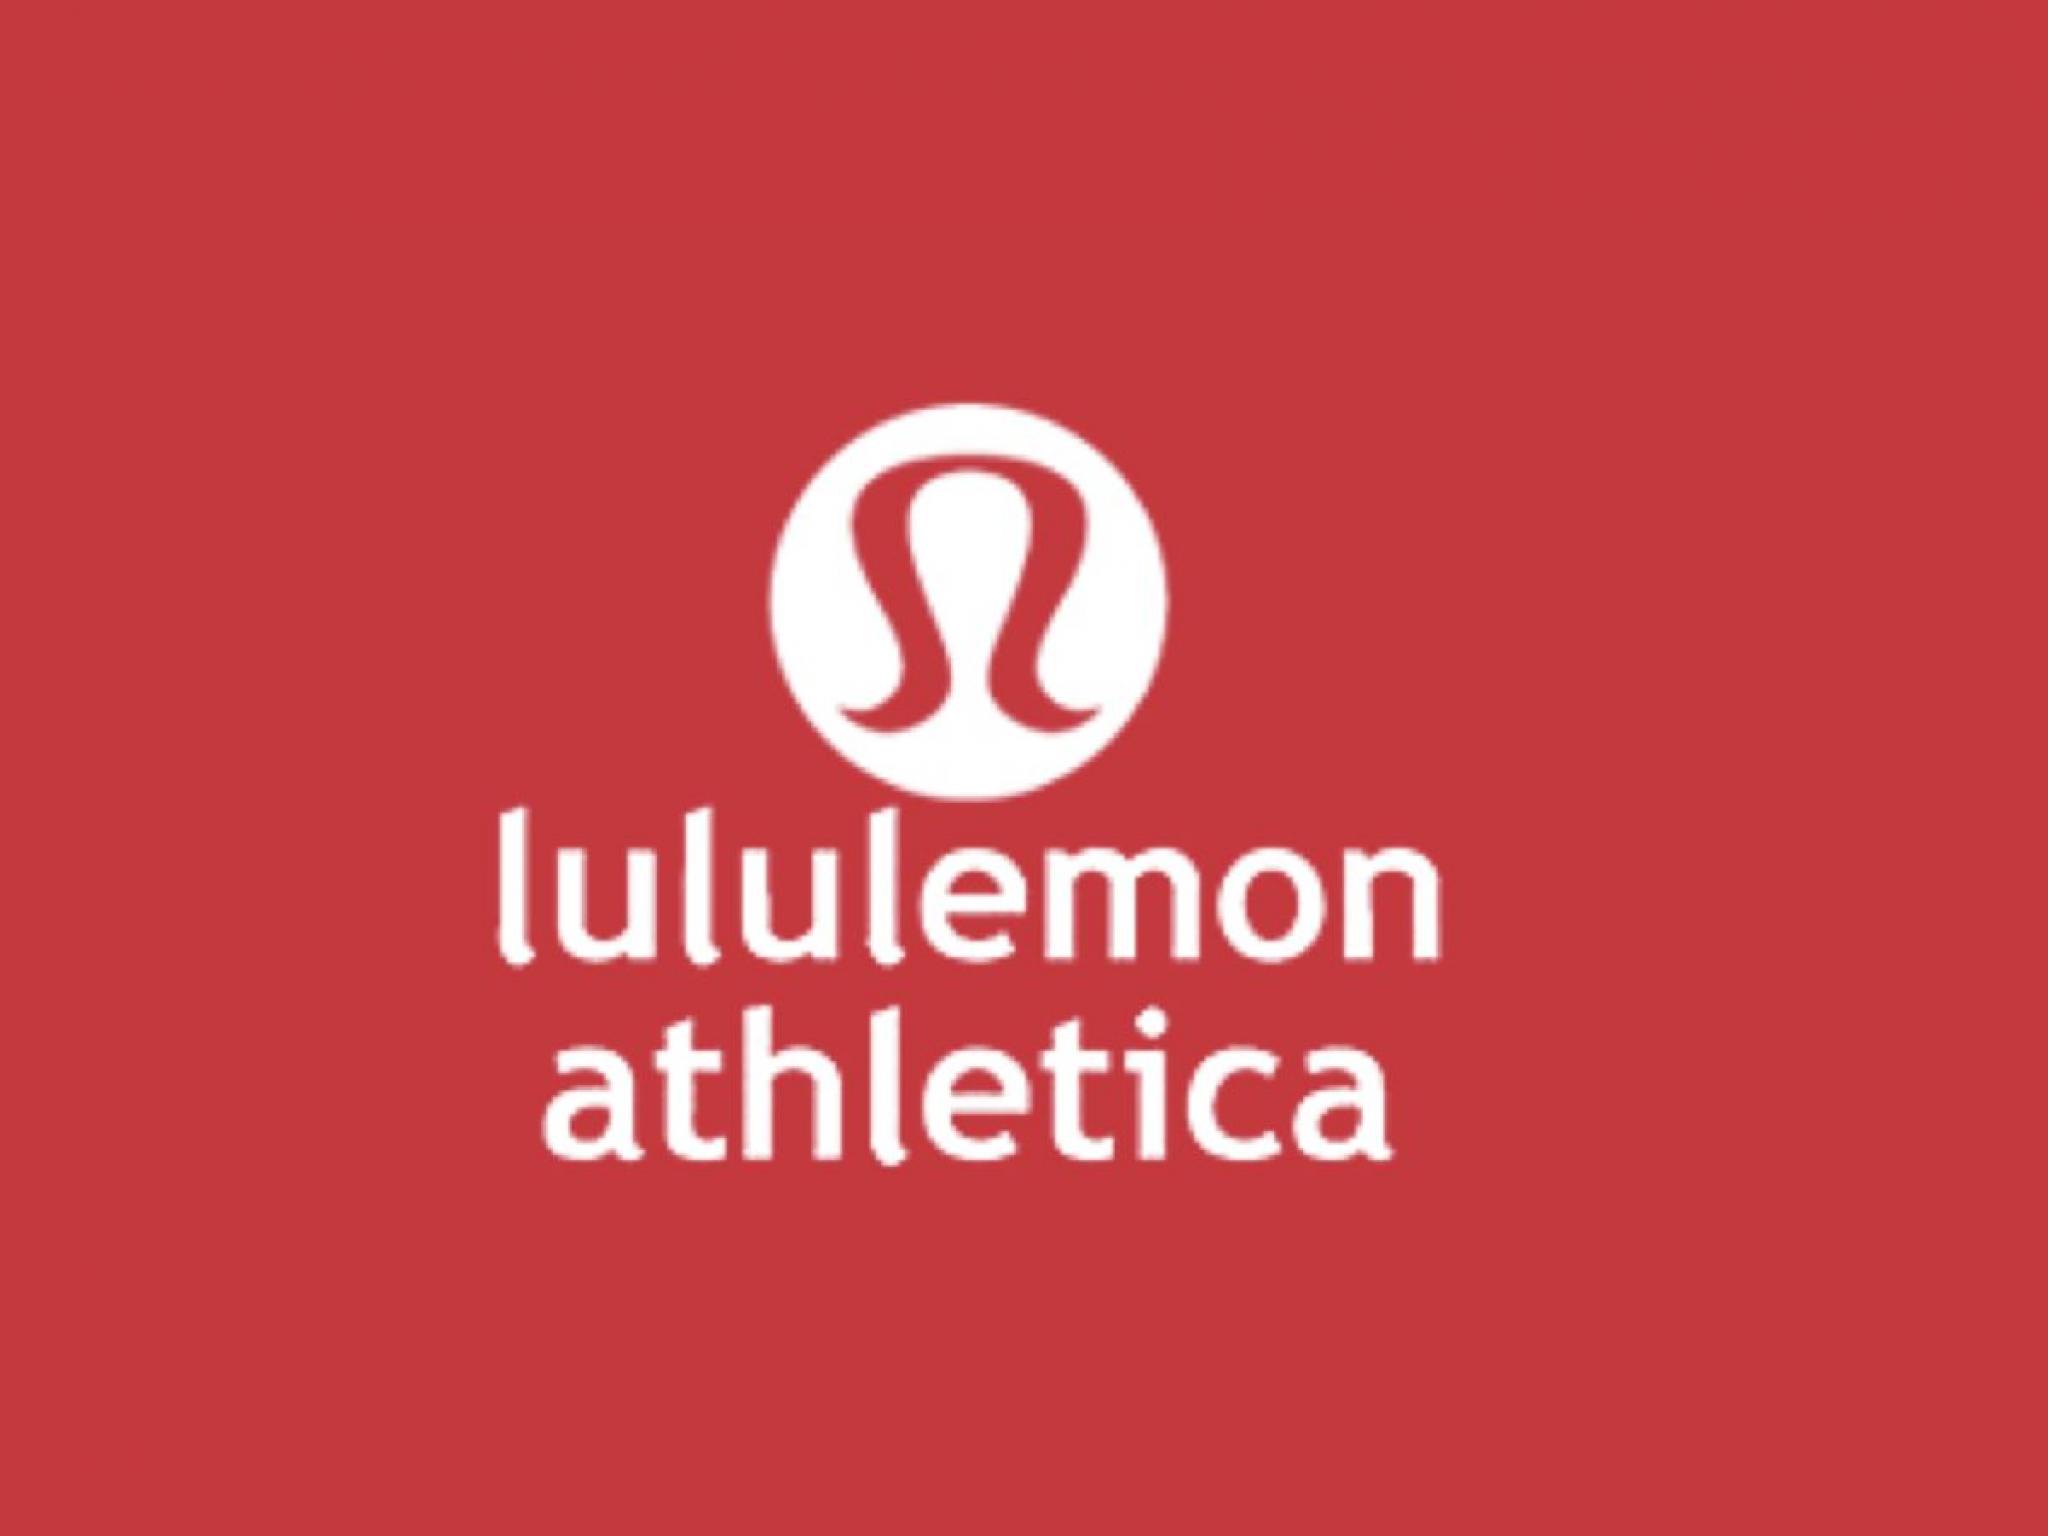  lululemon-to-rally-around-18-here-are-10-other-analyst-forecasts-for-friday 